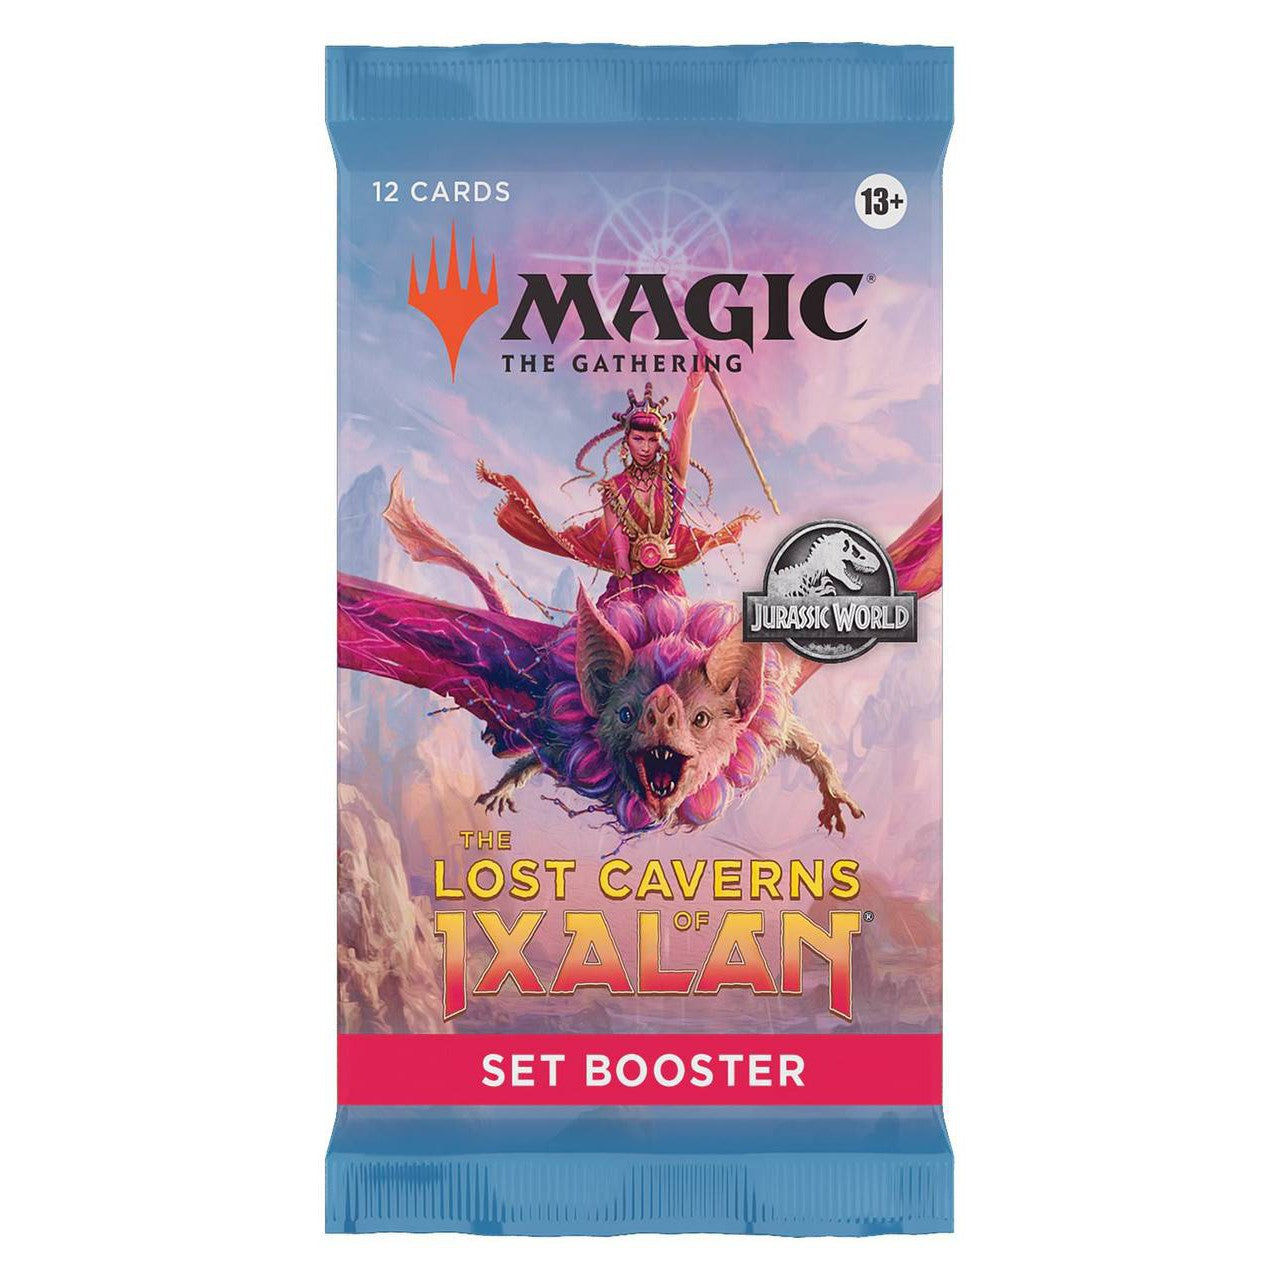 Magic the Gathering: The Lost Caverns of Ixalan set boosterpack